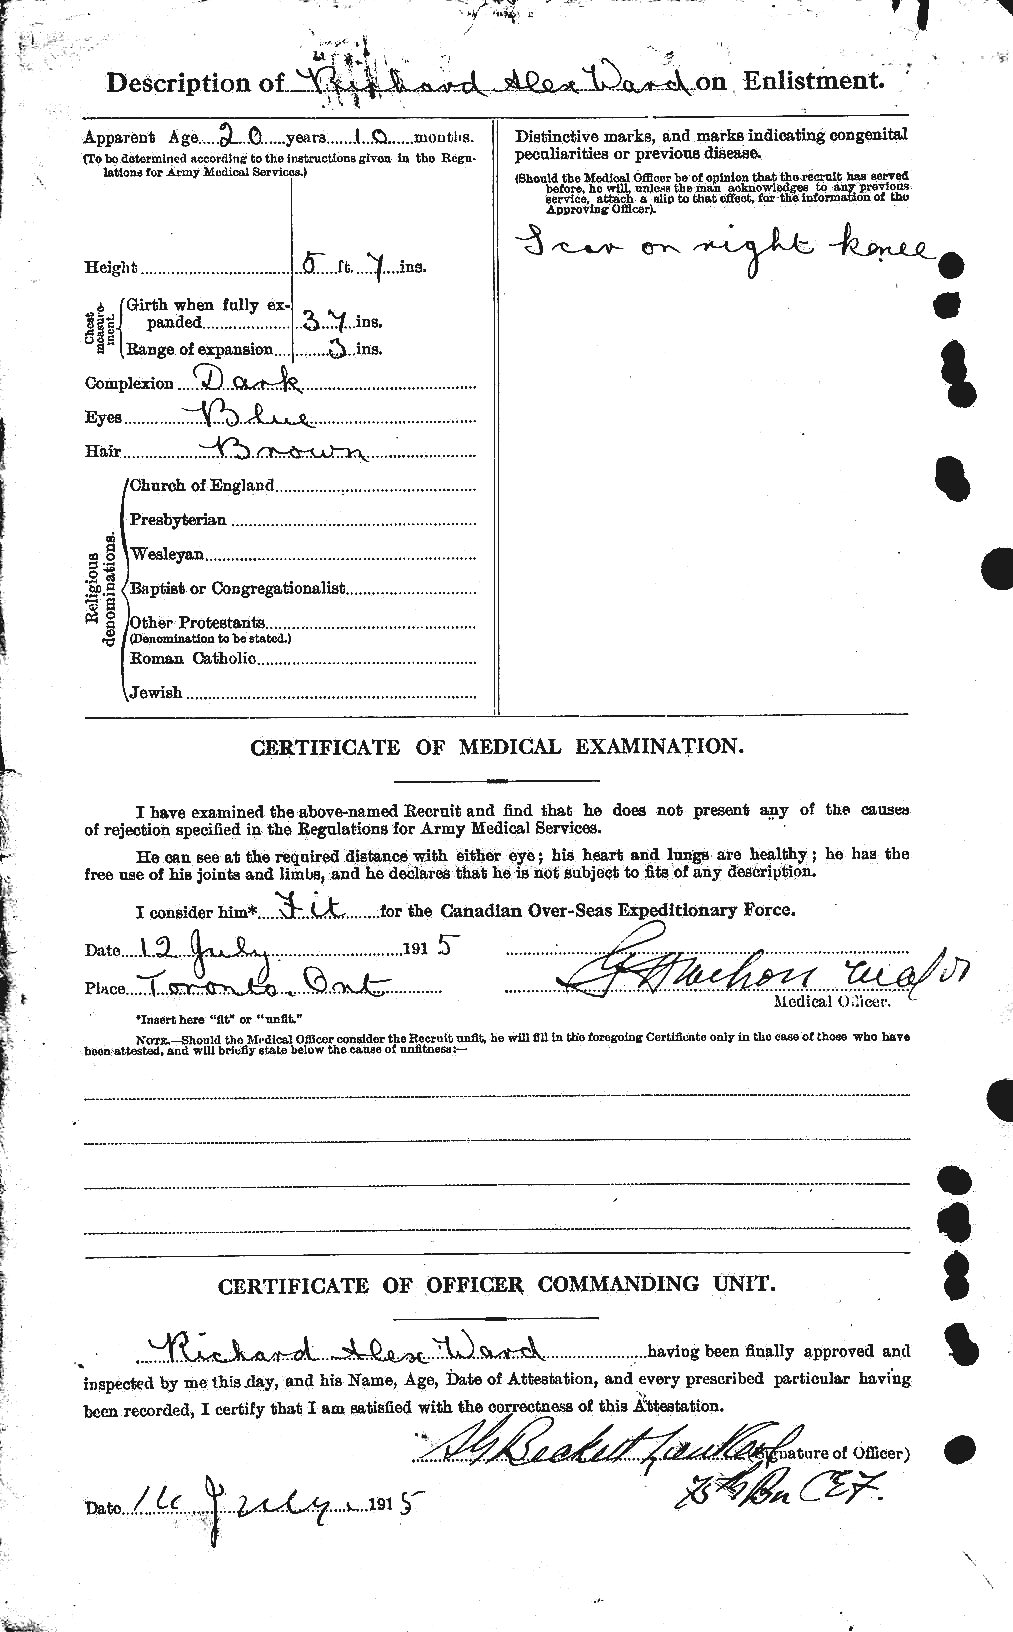 Personnel Records of the First World War - CEF 659650b